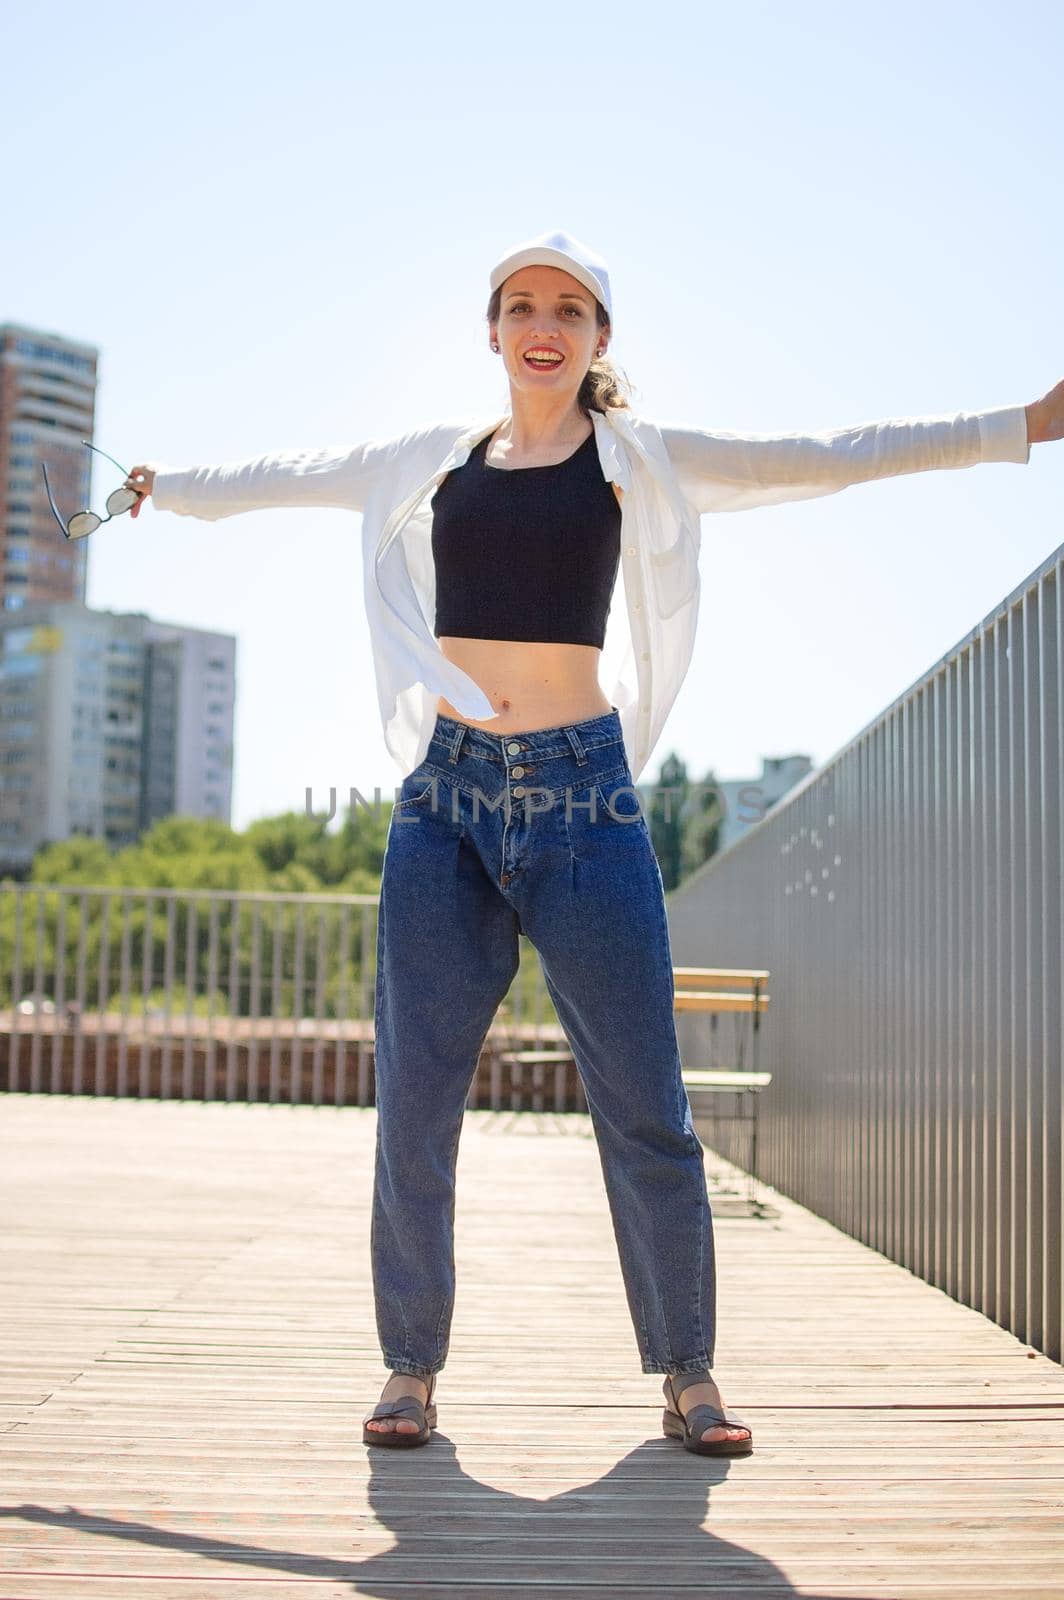 Female portrait of young active girl in black top, white shirt, basketball cap, and jeans on modern buildings background outdoors by balinska_lv